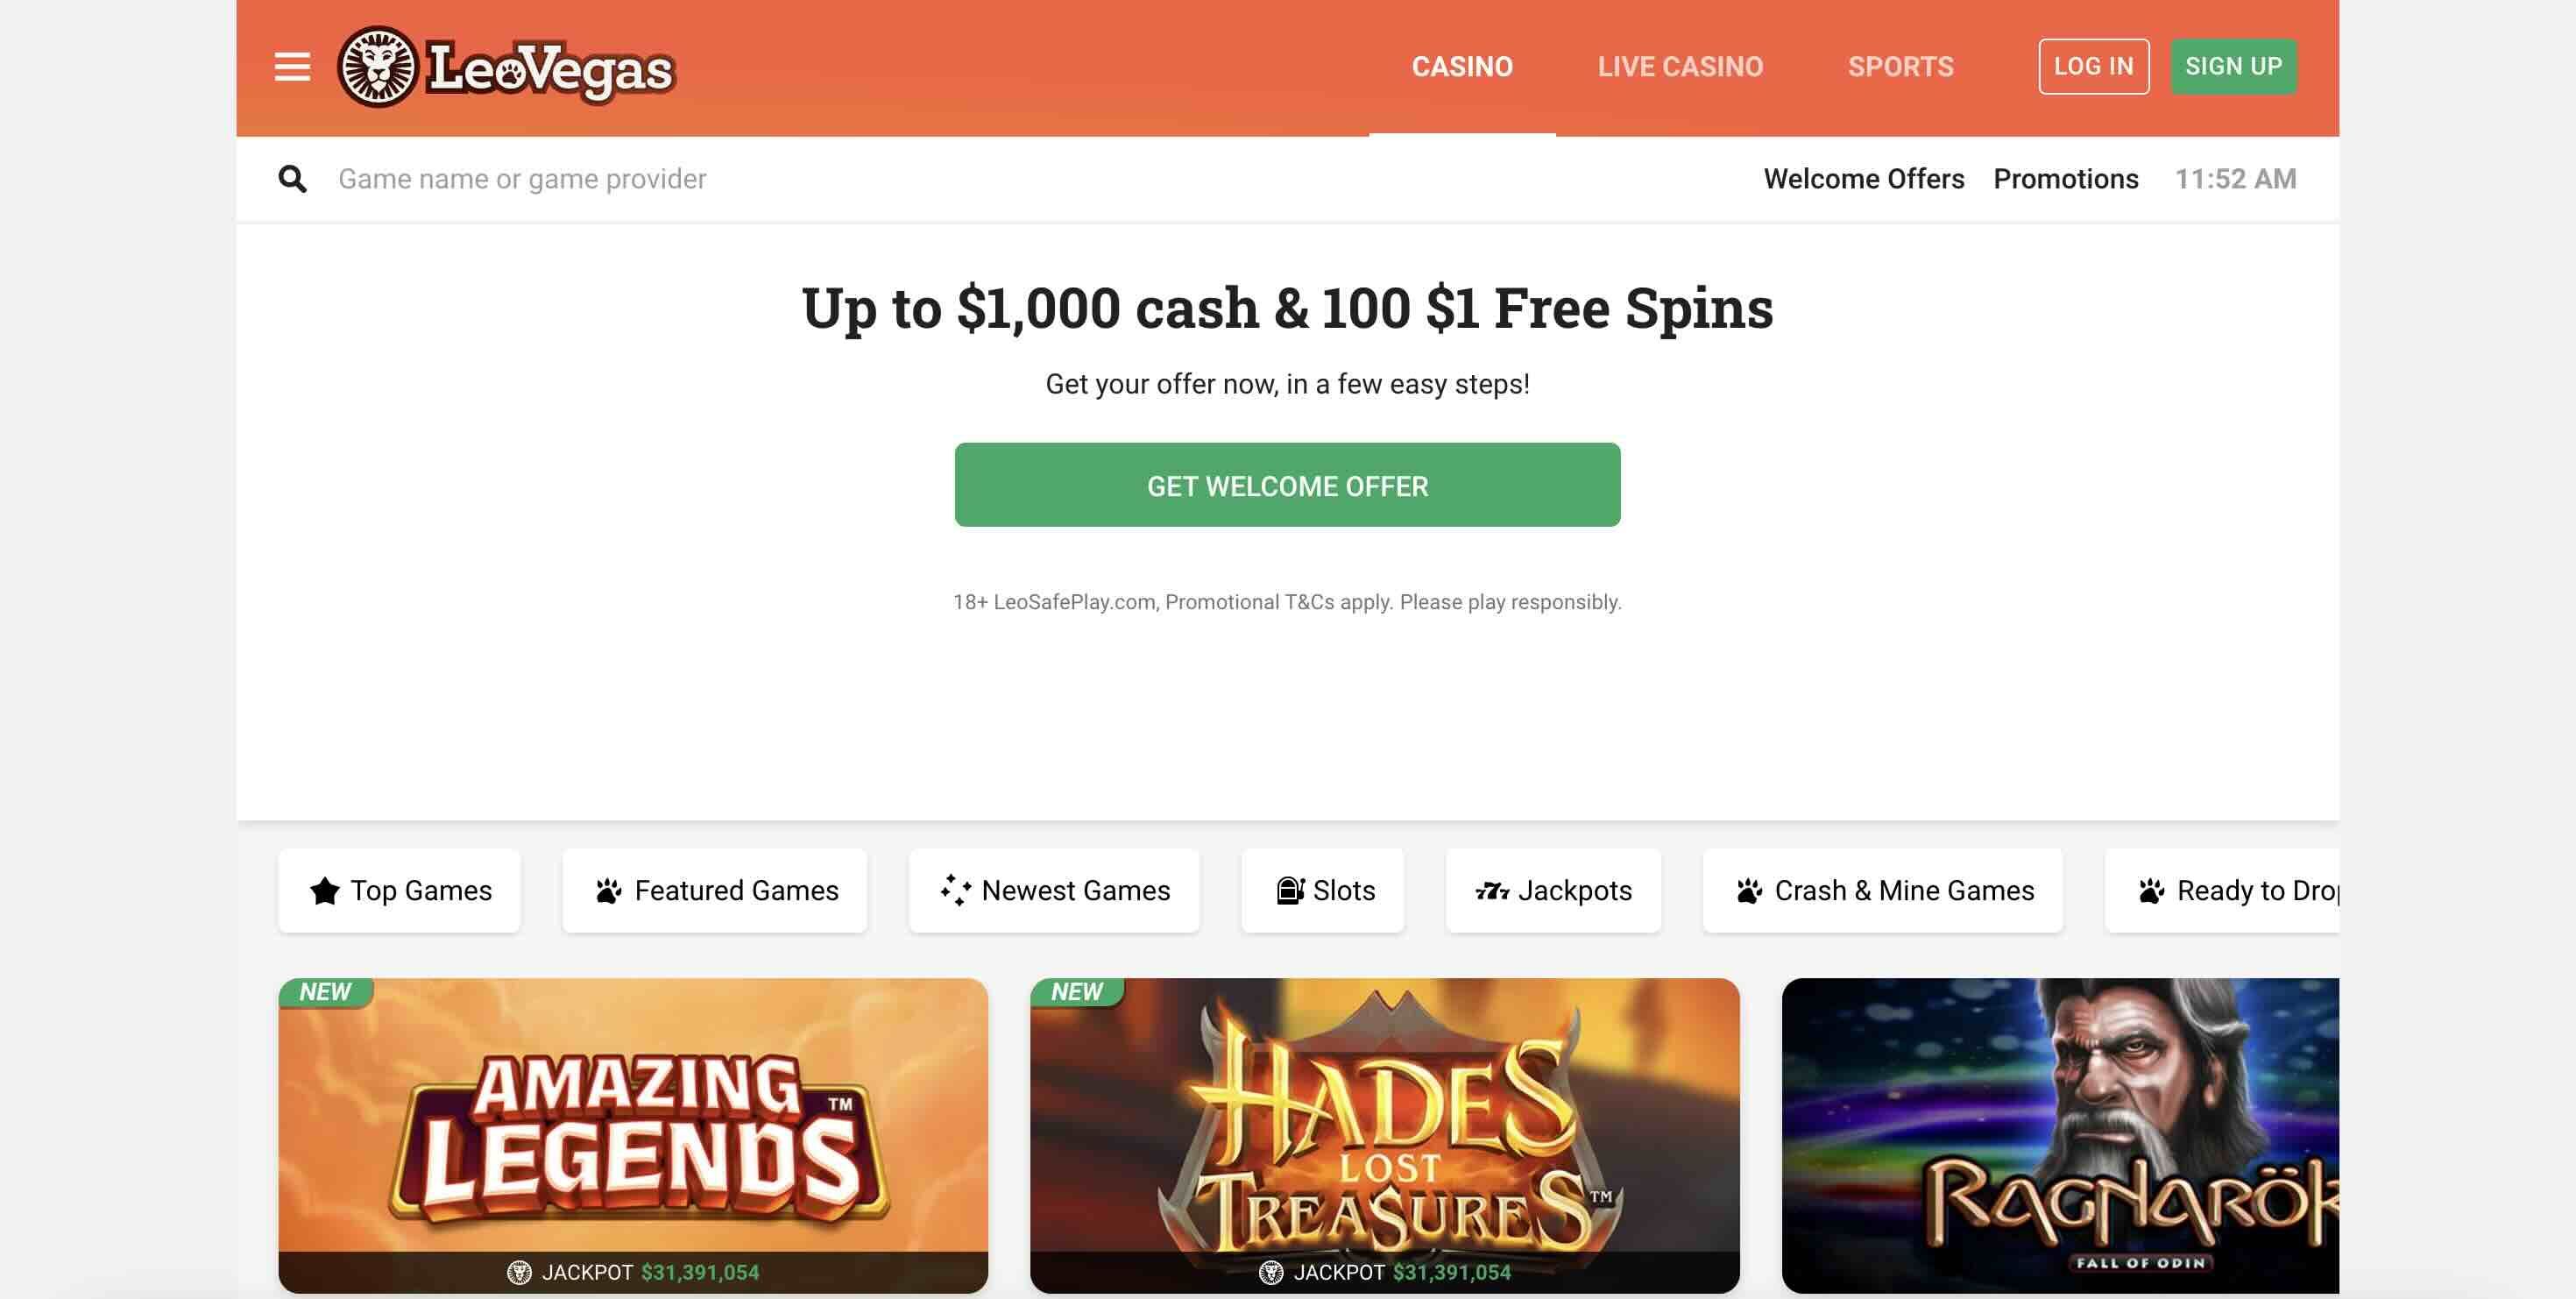 Image of main page of LeoVegas Casino